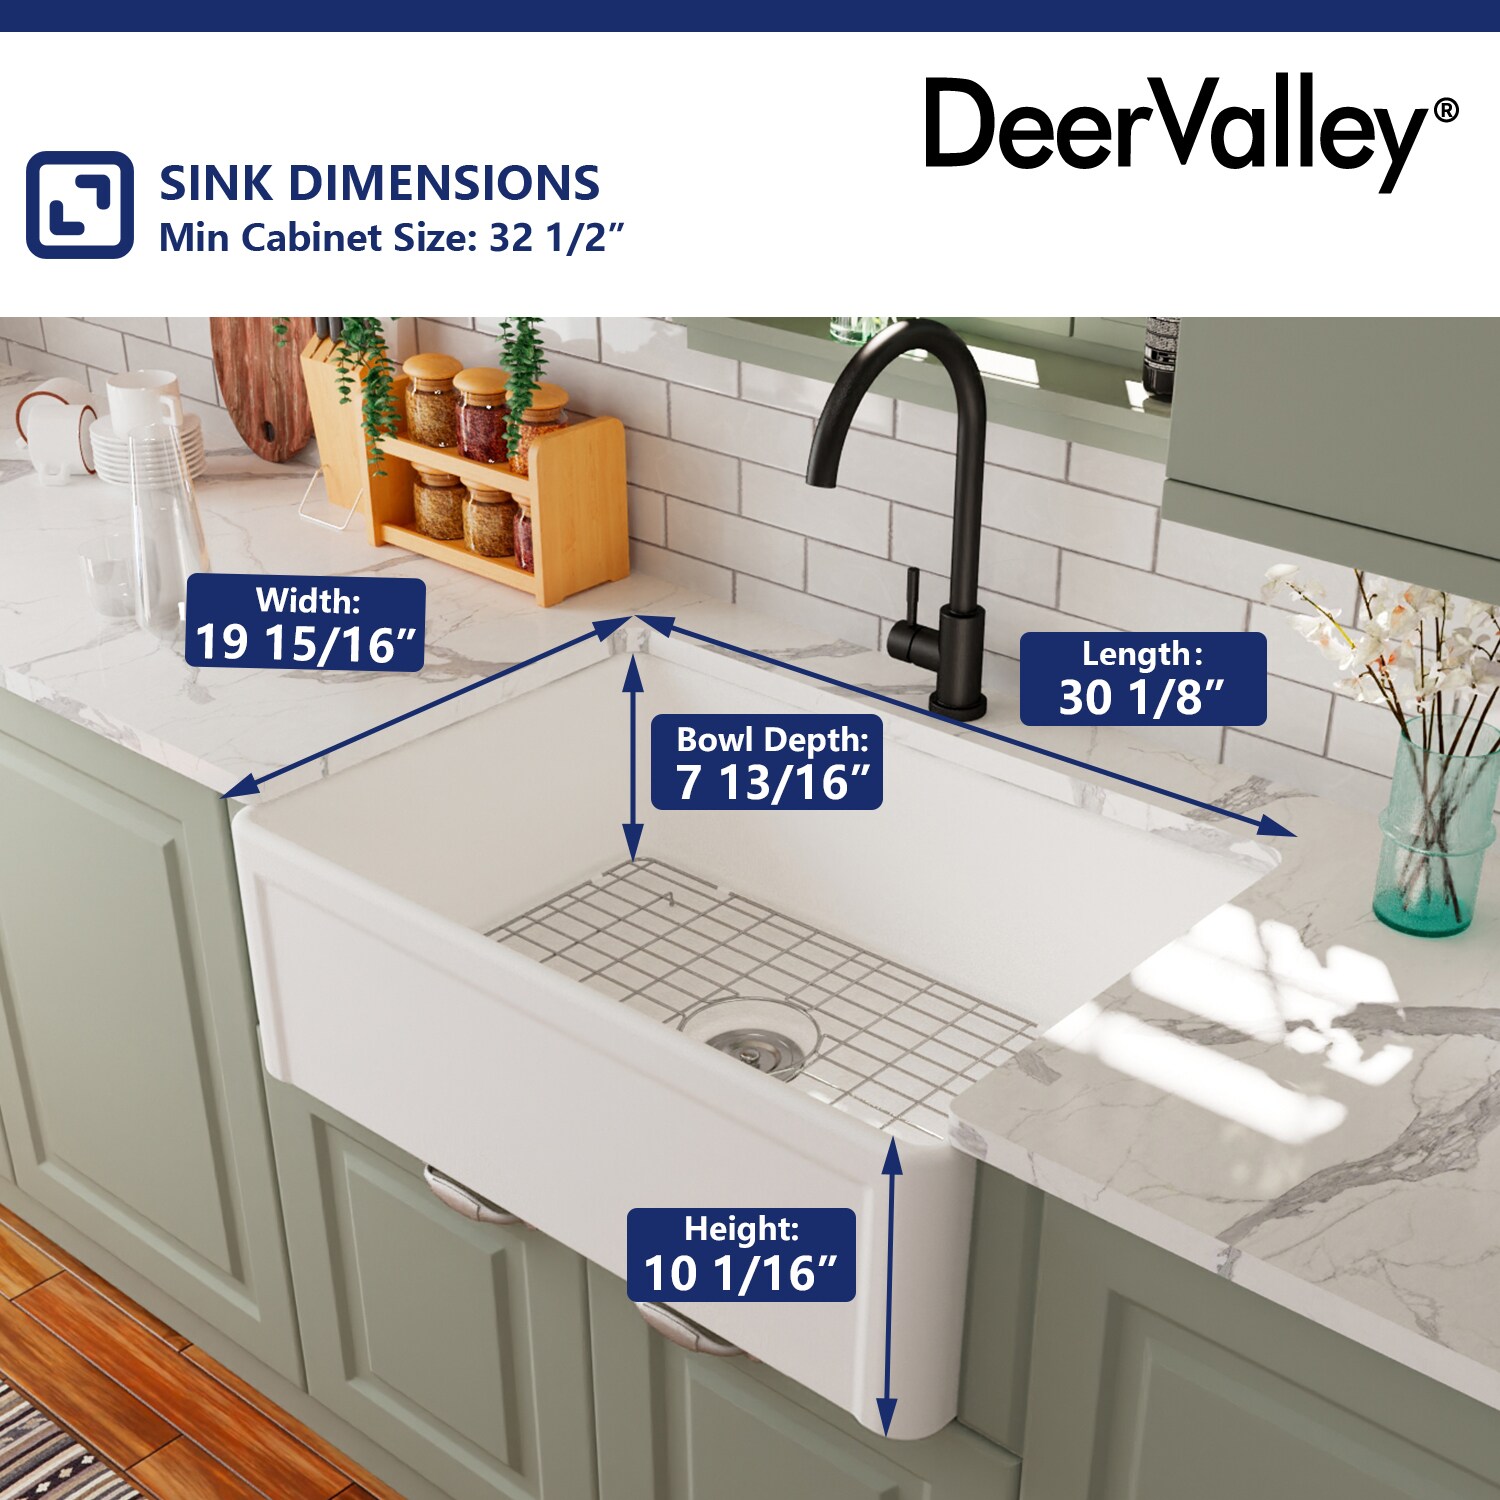 DeerValley Dv-1k026 Ceramic Farmhouse Kitchen Sink with Grid and Strainer,30 inch L x 18 inch W x 10 inch H, Size: One Size